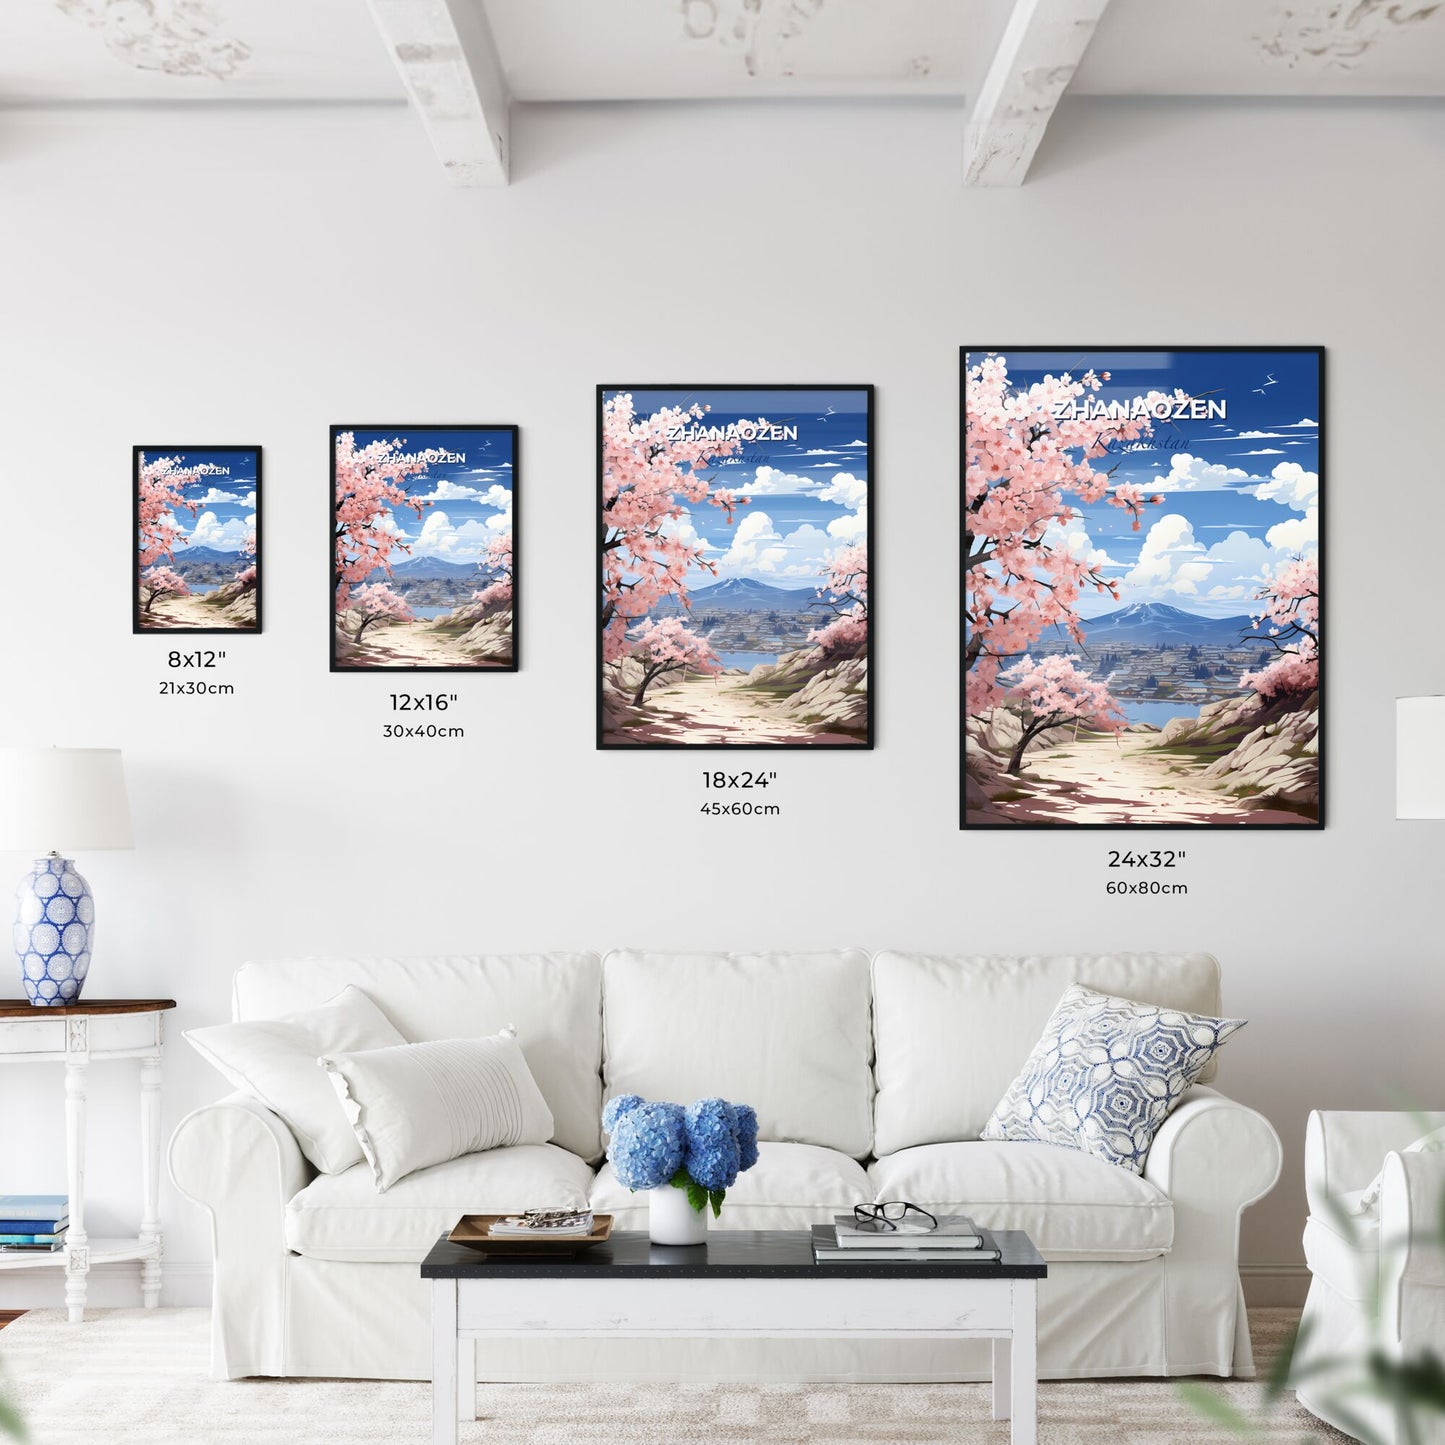 Zhanaozen, Kazakhstan, A Poster of a landscape with pink flowers and a mountain in the background Default Title